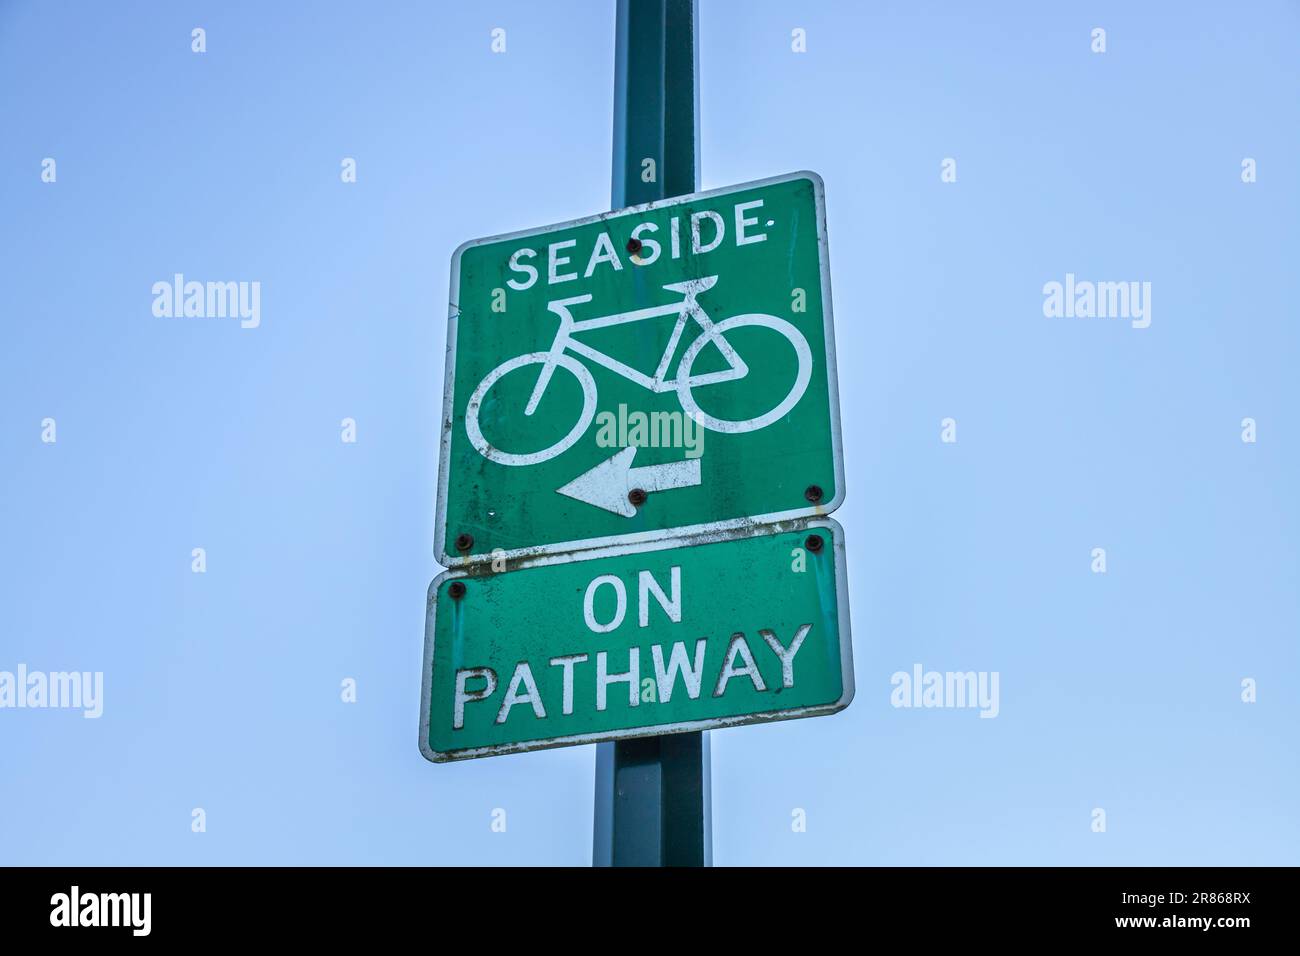 A road sign “SEASIDE ON PATHWAY” with icons of bicycle and arrow direction sign. Rustic countryside road near beach, summer journey concept Stock Photo